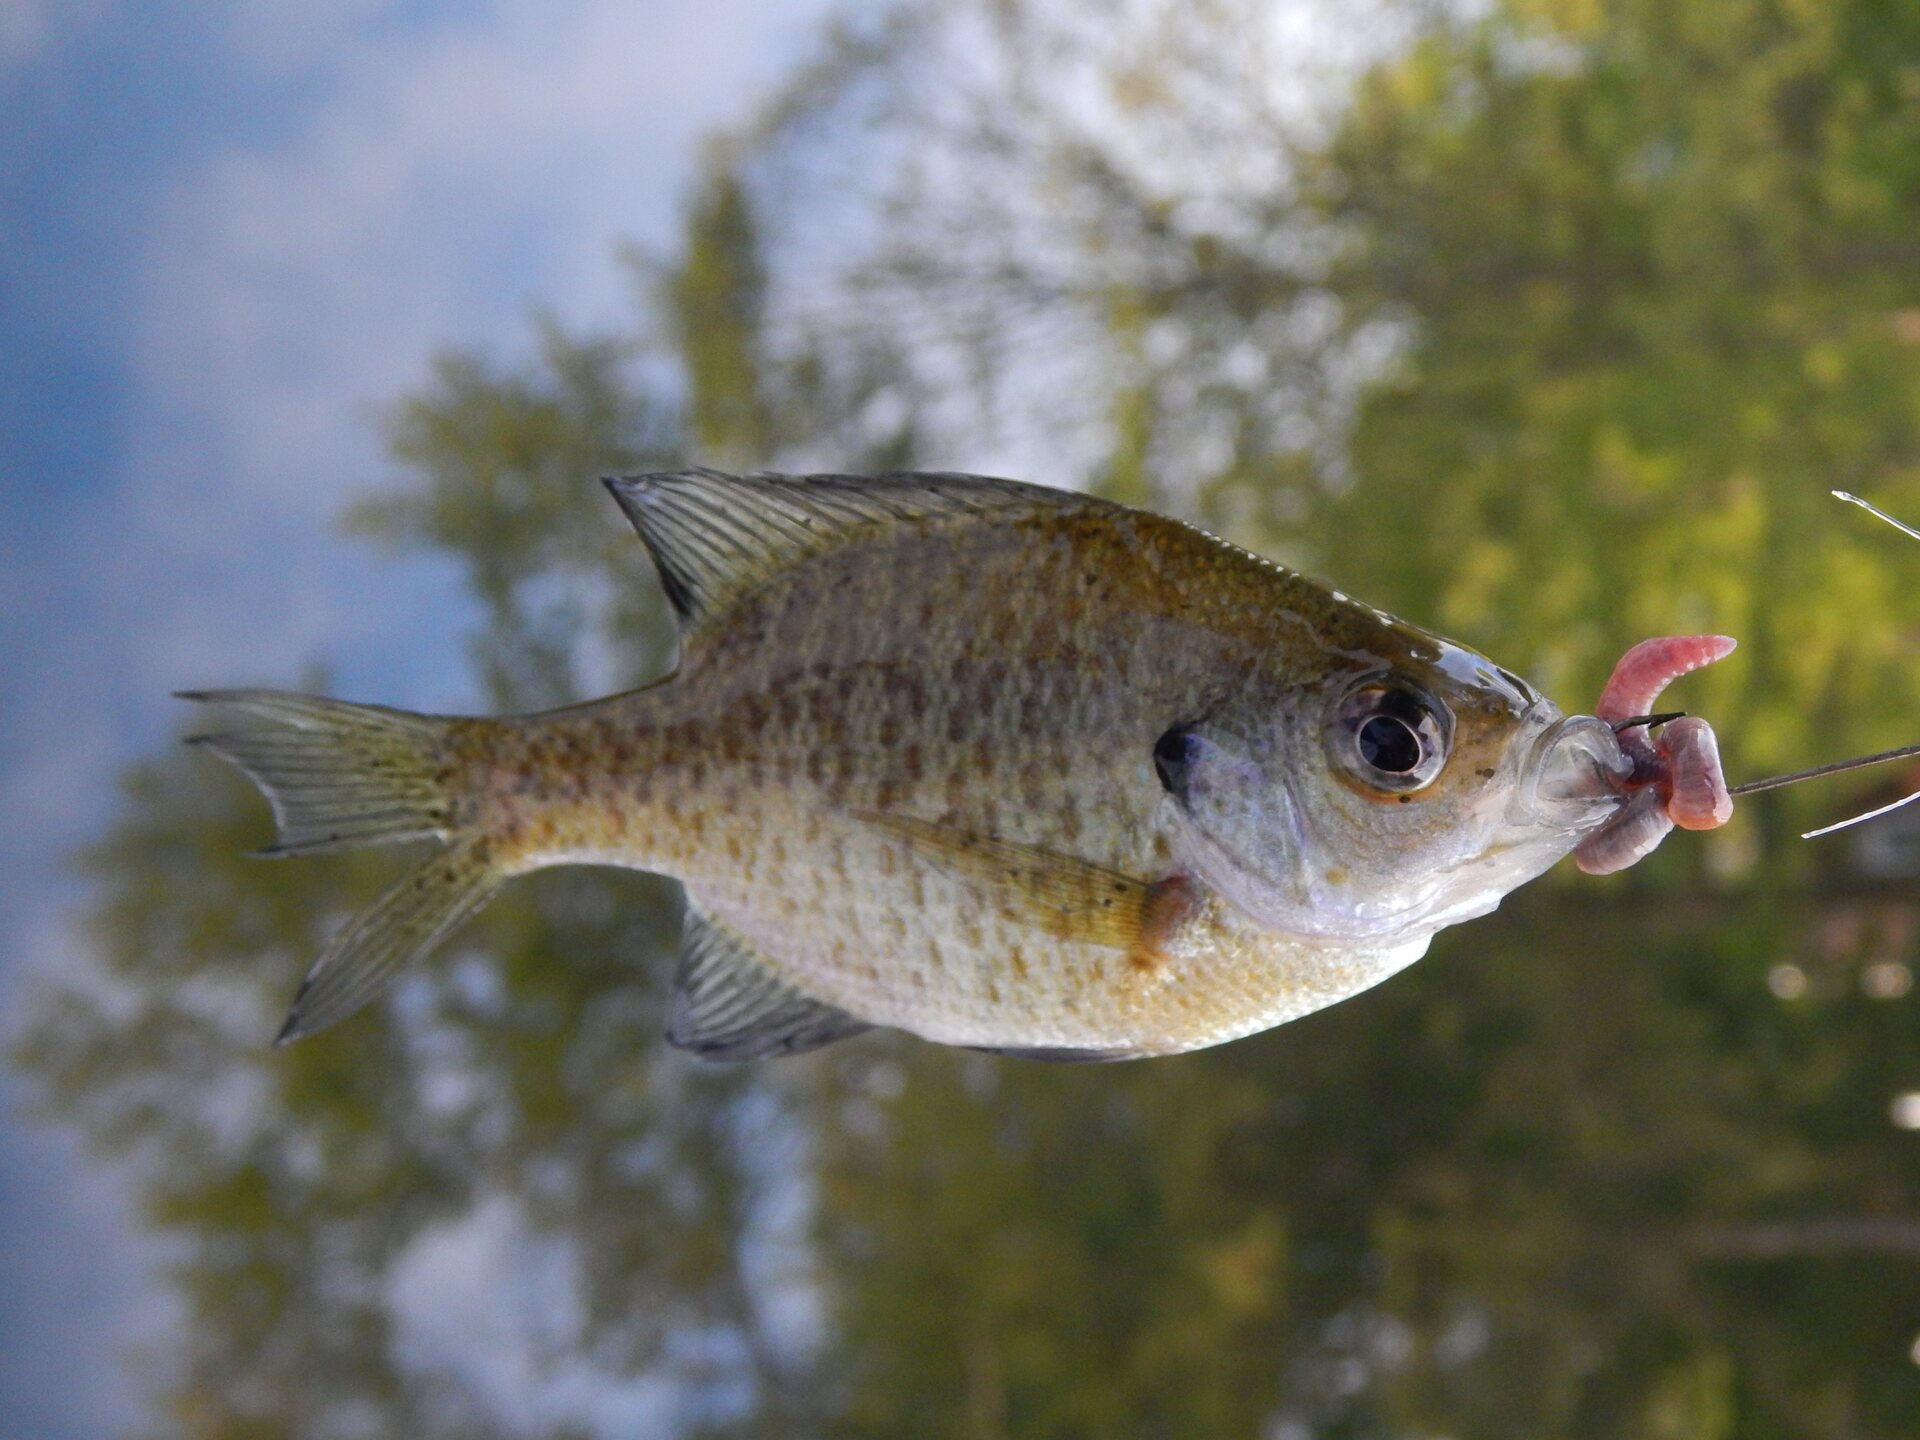 Bluegill caught on a hook with worm bait